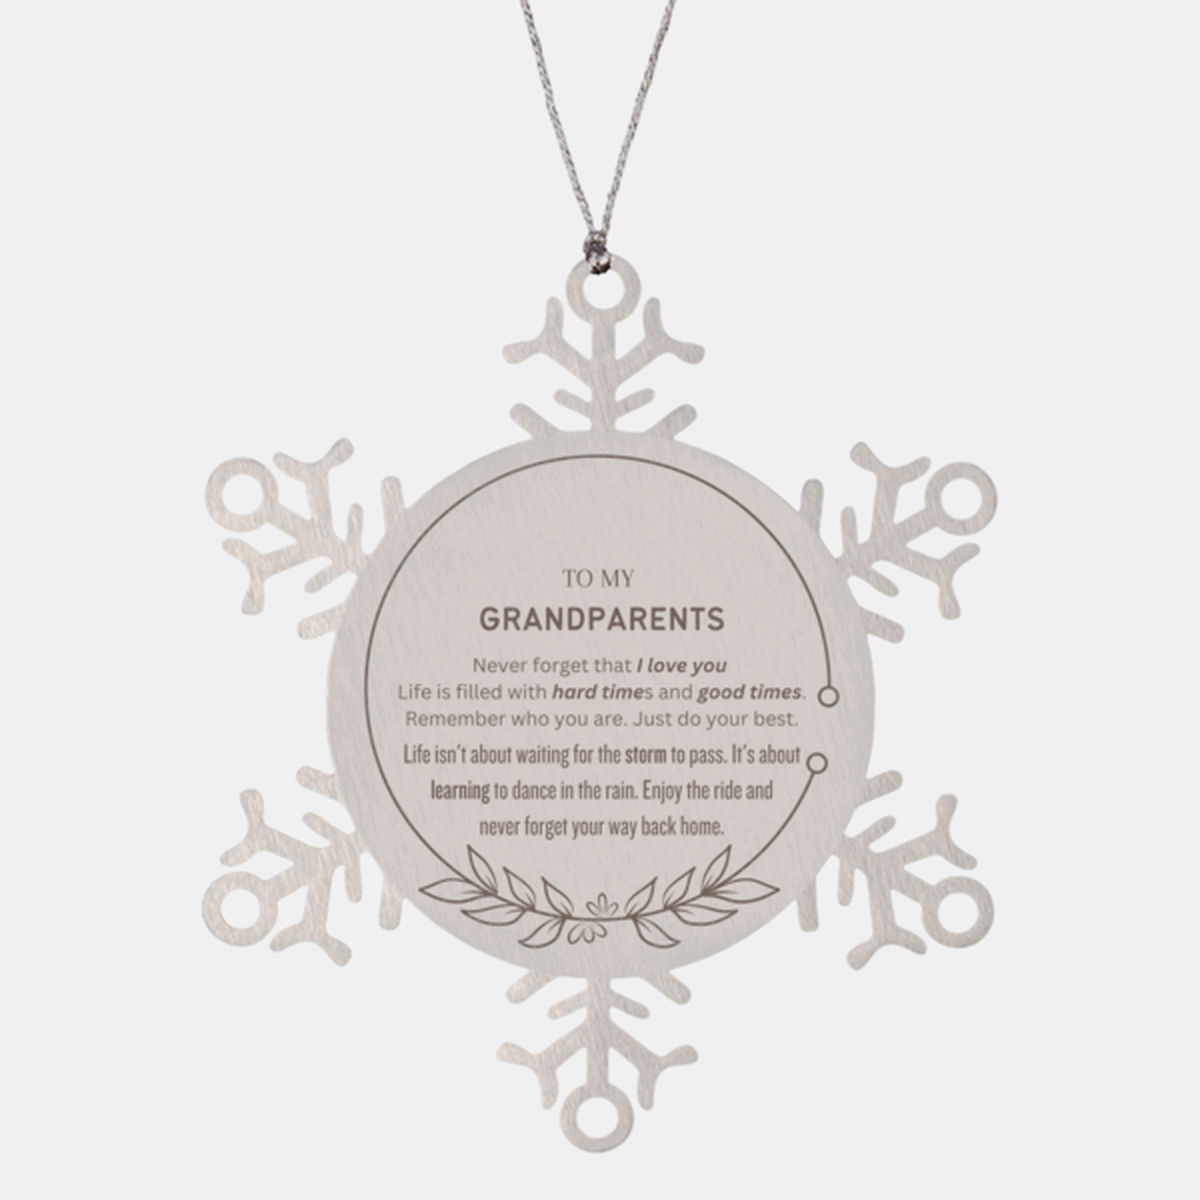 Christmas Grandparents Snowflake Ornament Gifts, To My Grandparents Thank You Gifts For Grandparents, Xmas Decorations Unique Gifts For Grandparents To My Grandparents Never forget that I love you life is filled with hard times and good times. Remember wh